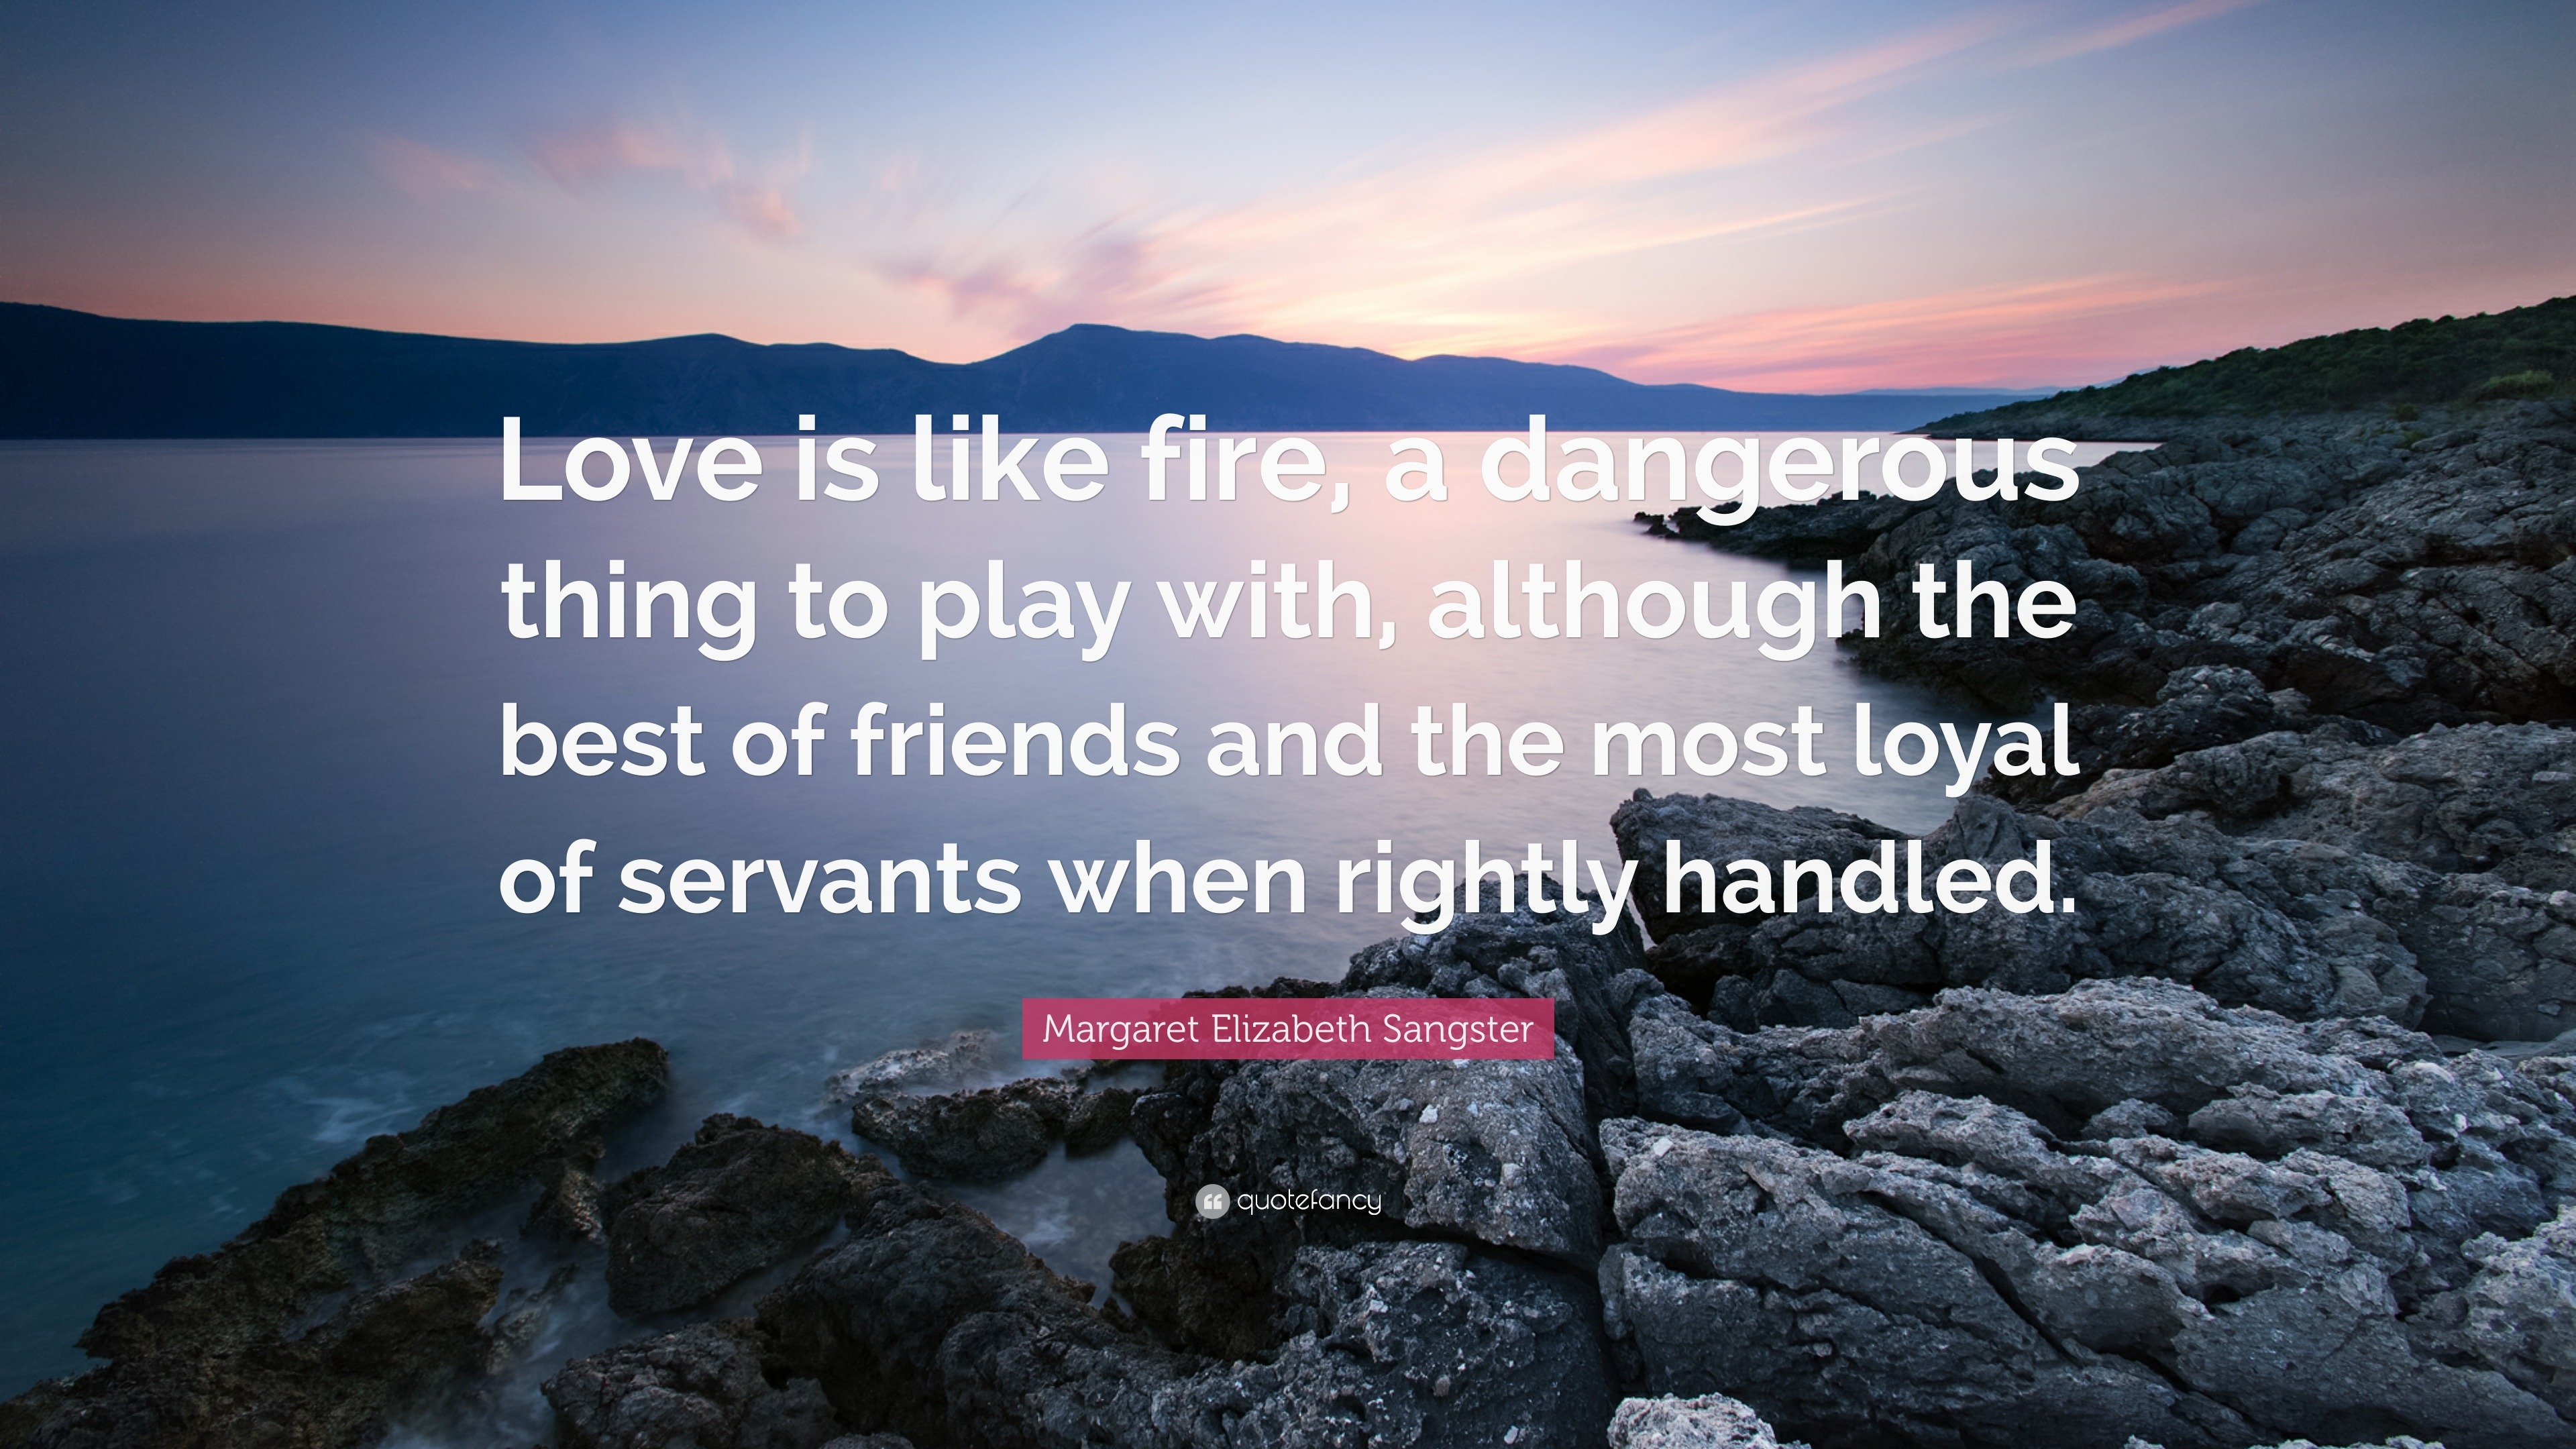 Margaret Elizabeth Sangster Quote “Love is like fire a dangerous thing to play